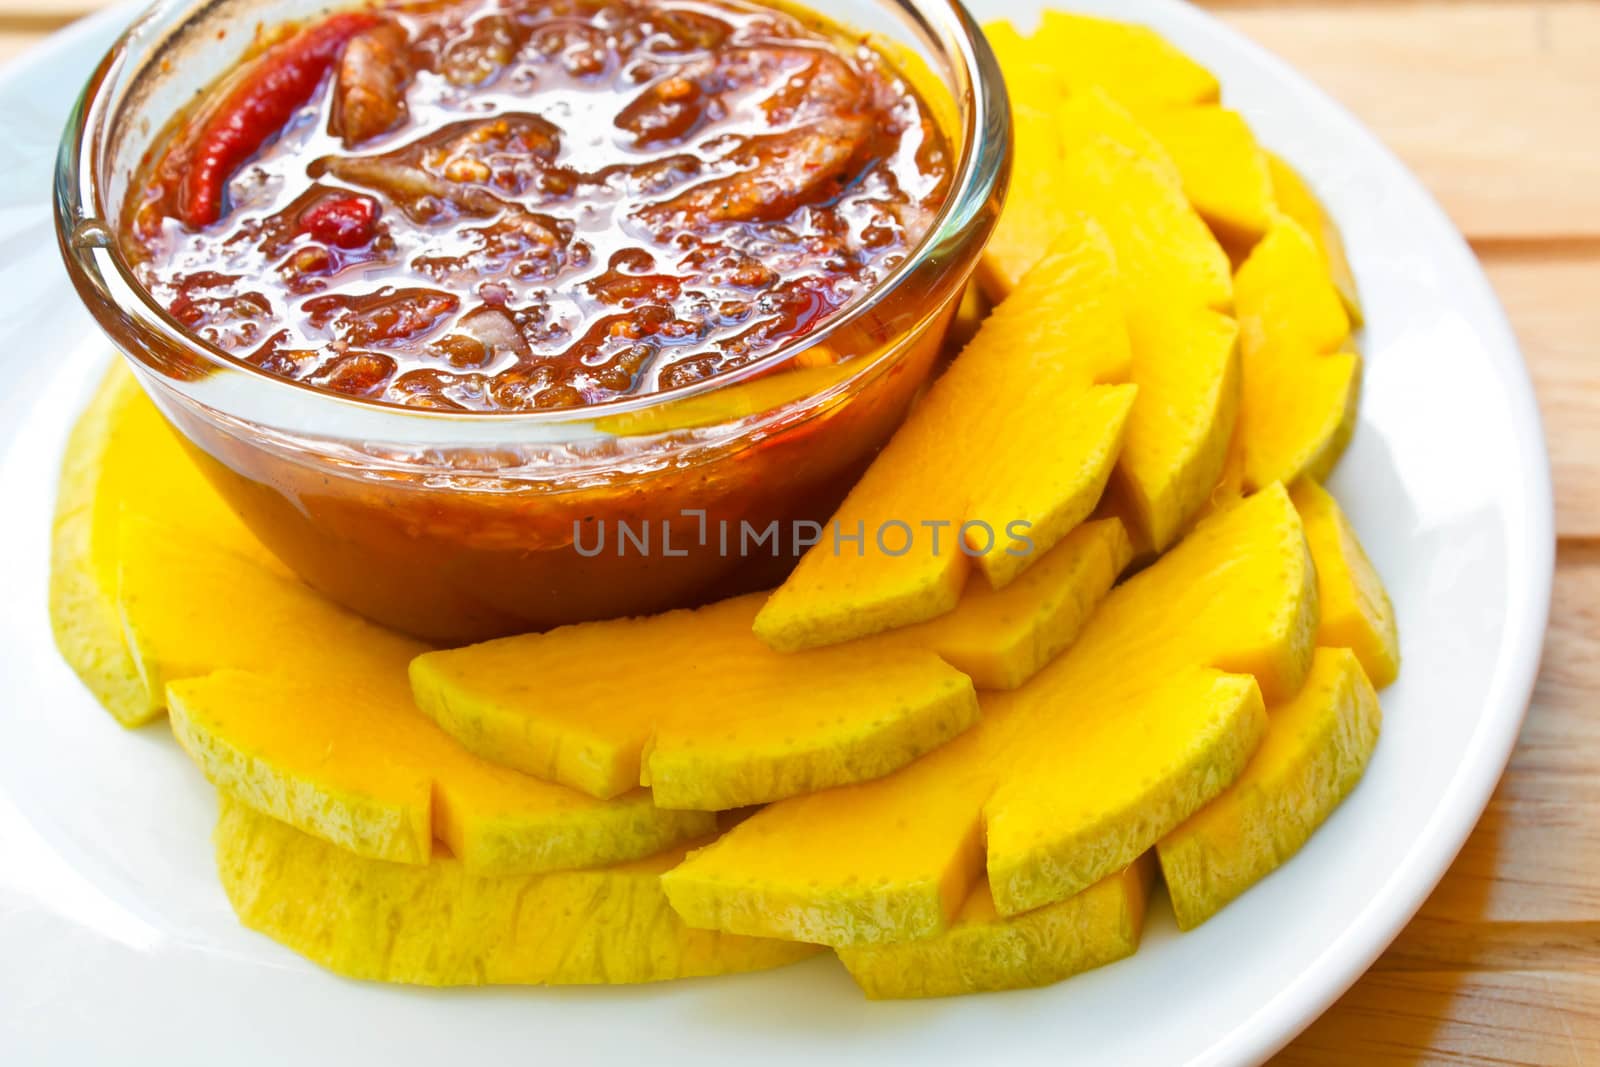 mango with sweet fish sauce, one of thailand's famous desserts.